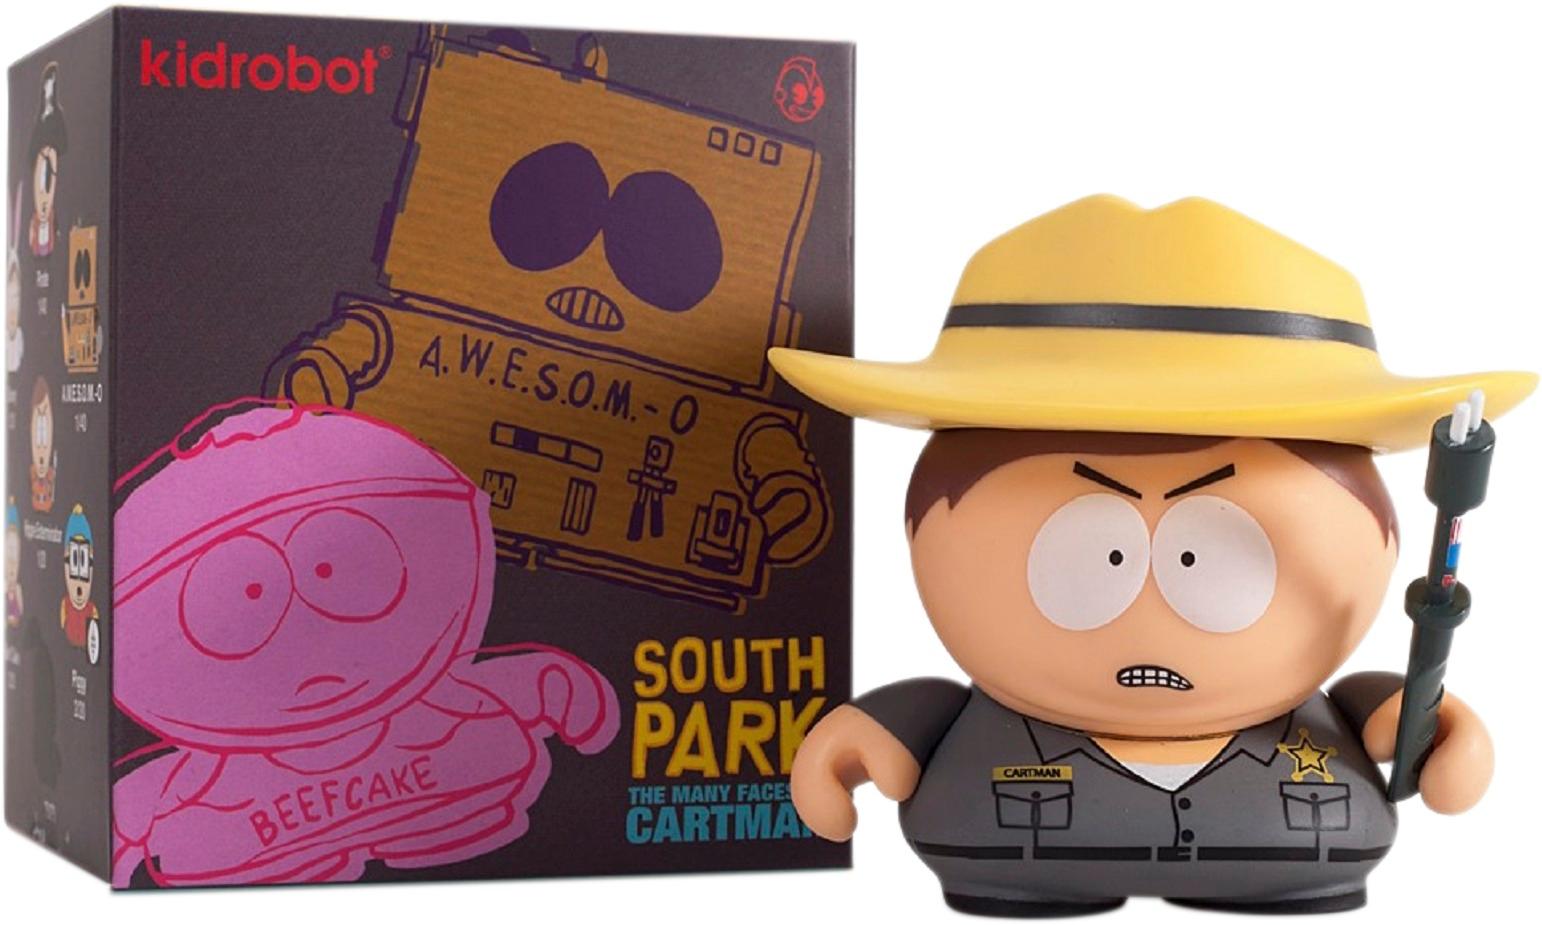 Many Faces of Cartman South Park Series 2 Kidrobot Mint in Box Whatever 